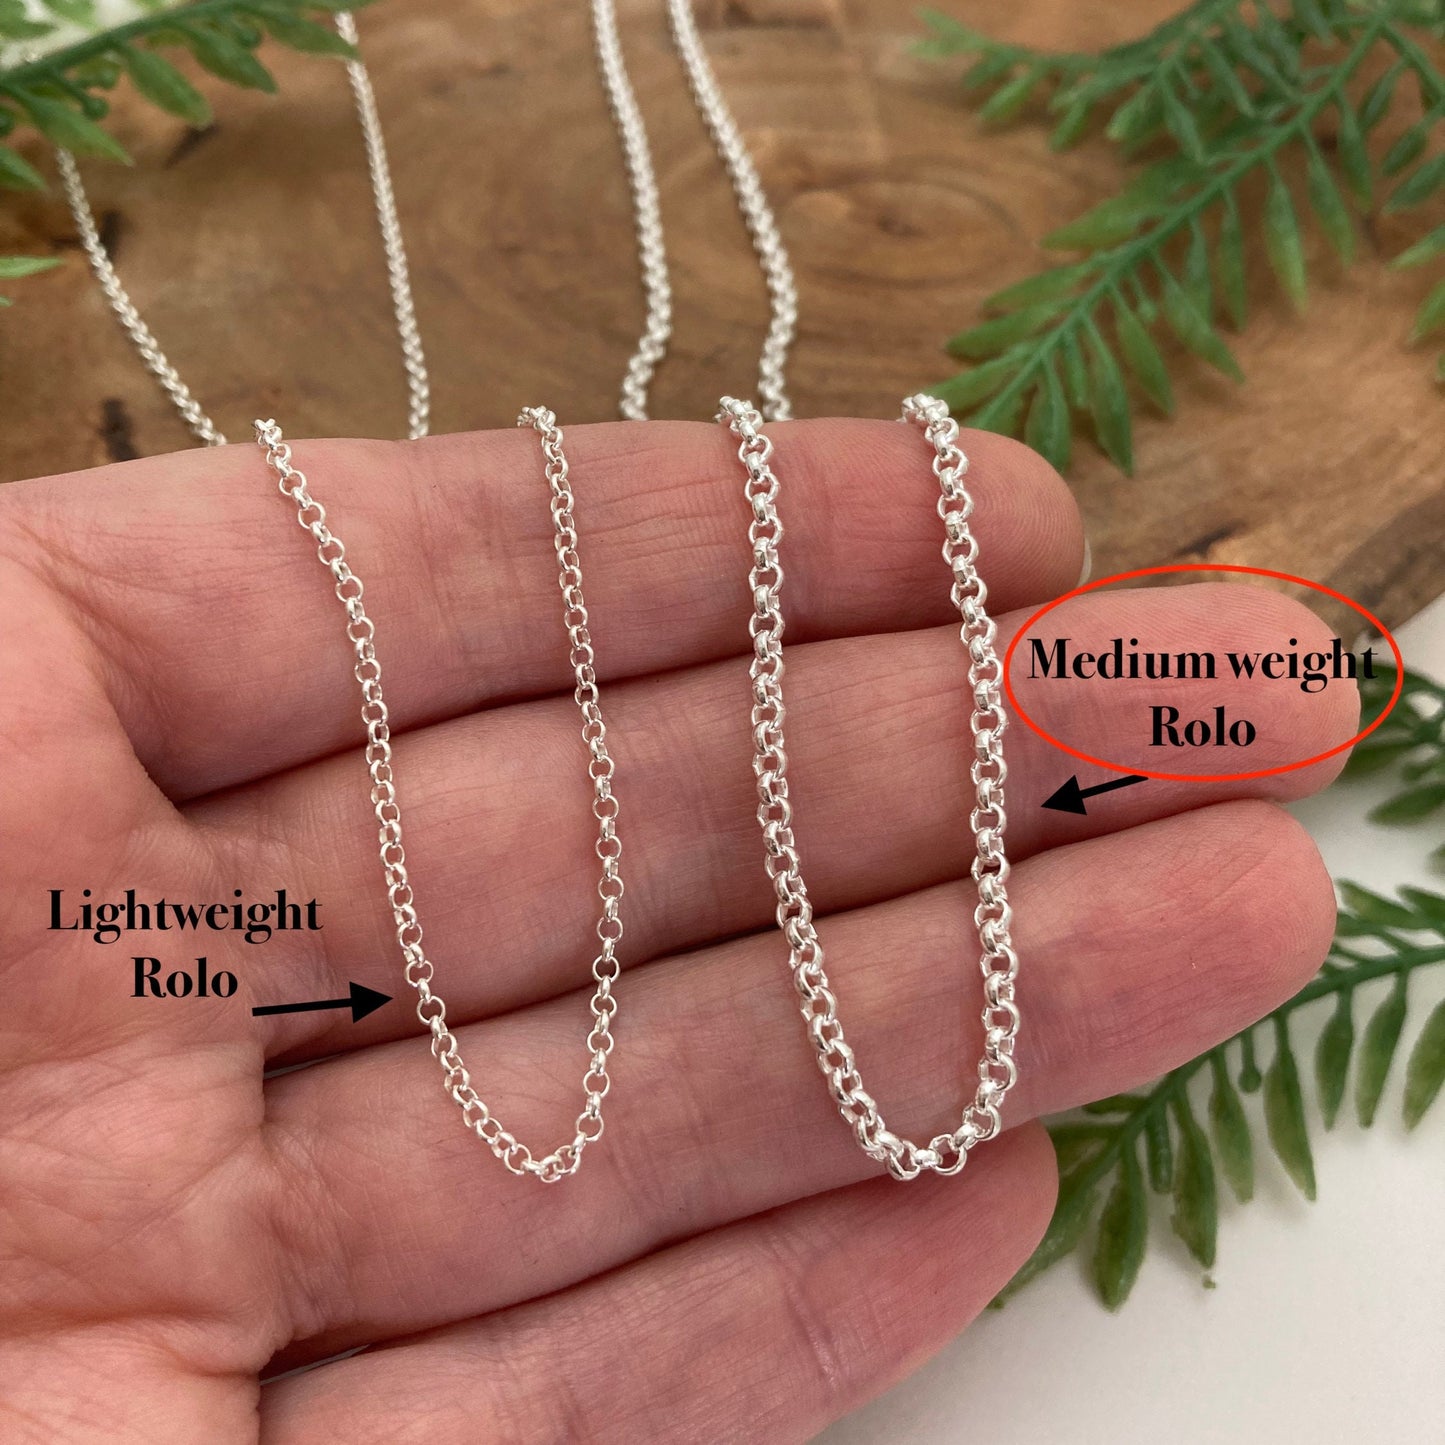 Medium Weight Sterling Silver Rolo Chain